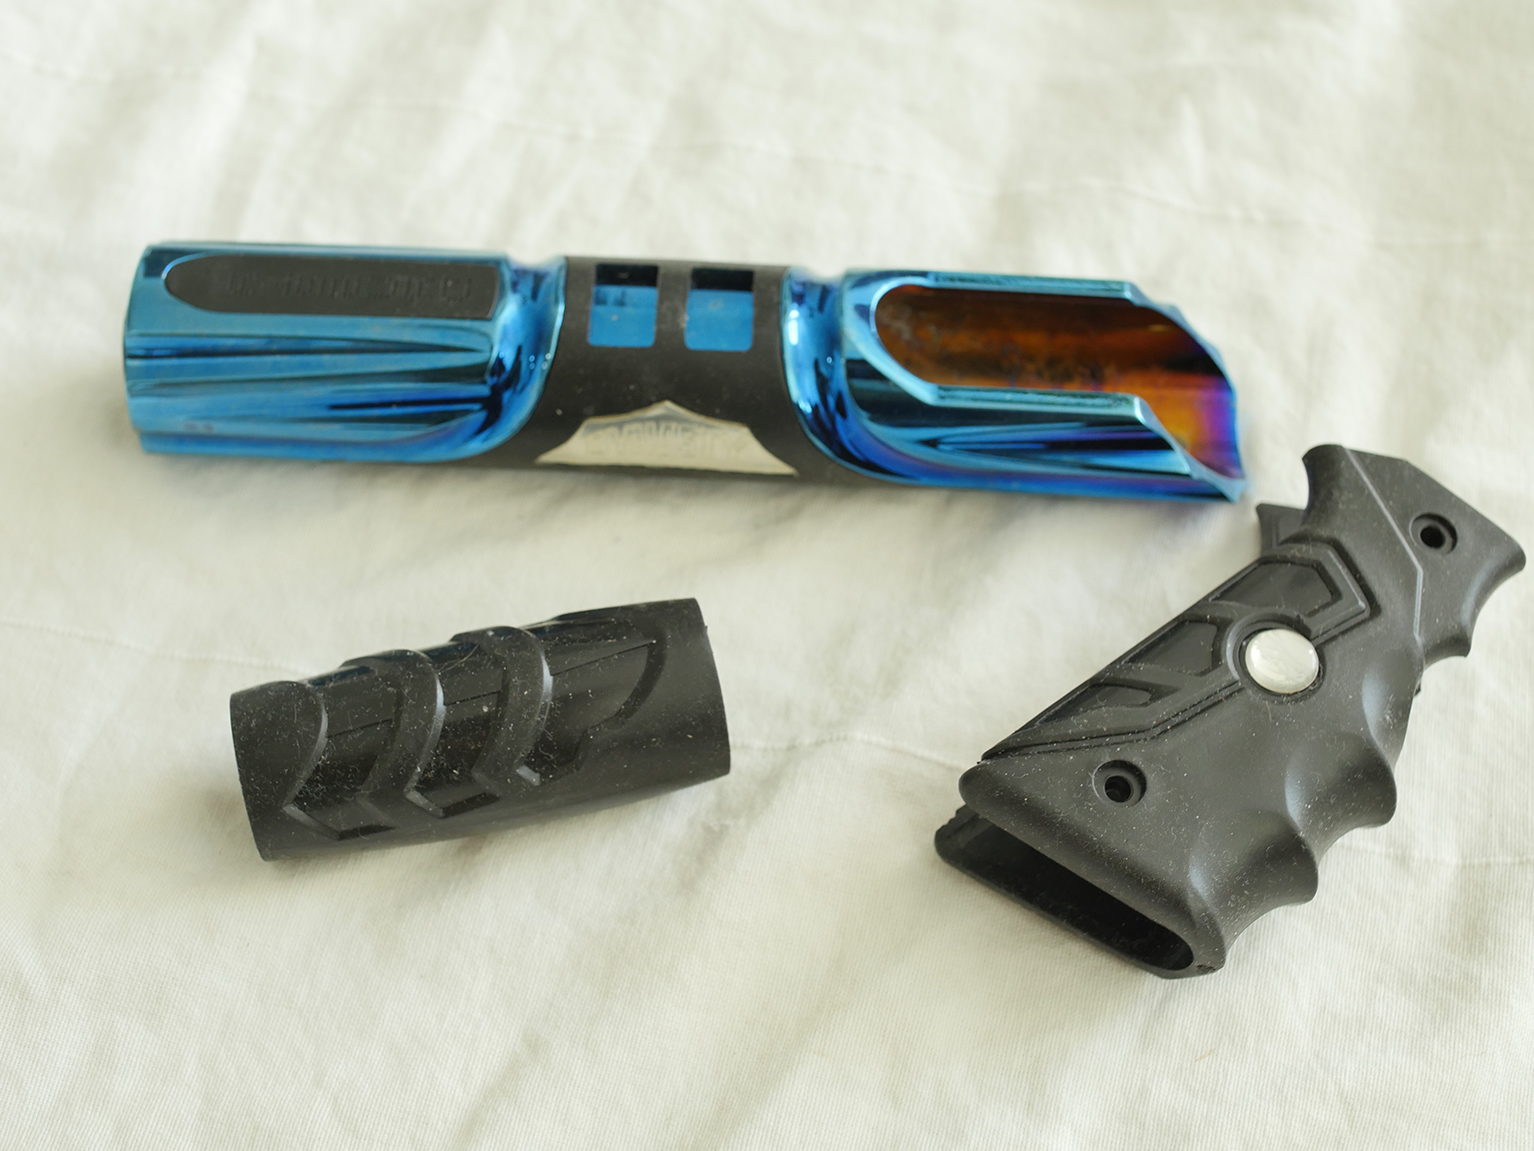 Dynasty ion body, grips and forgrip, looks good, don't know anything about this.